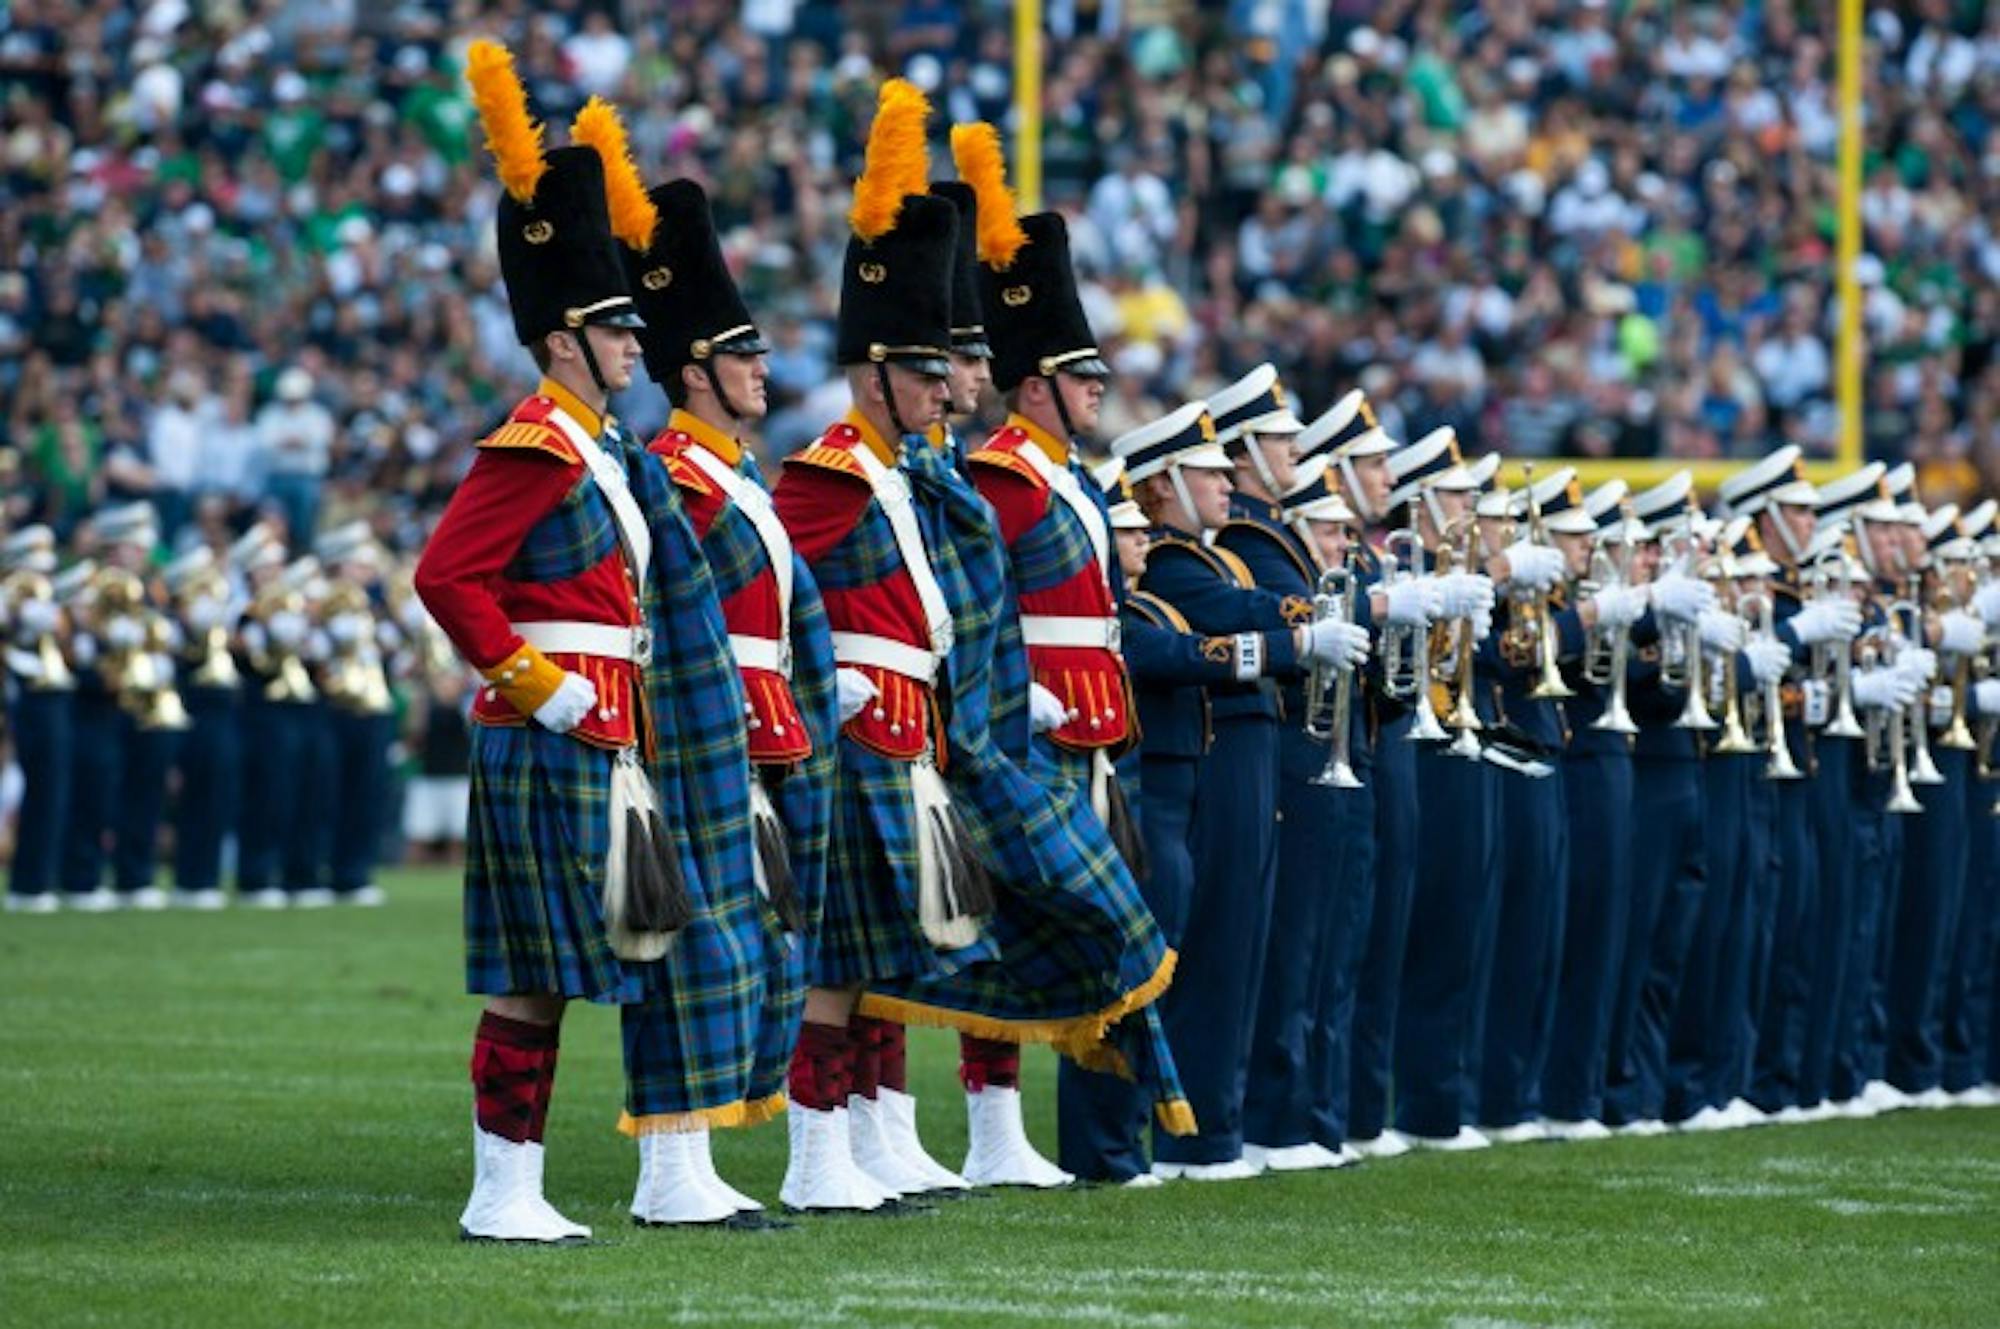 The Irish Guard performs alongside the Band of the Fighting Irish in the Sept. 8, 2012, game against Purdue. The Guard has been restructured to include band members only, eliminating the height requirement of 6'2''.